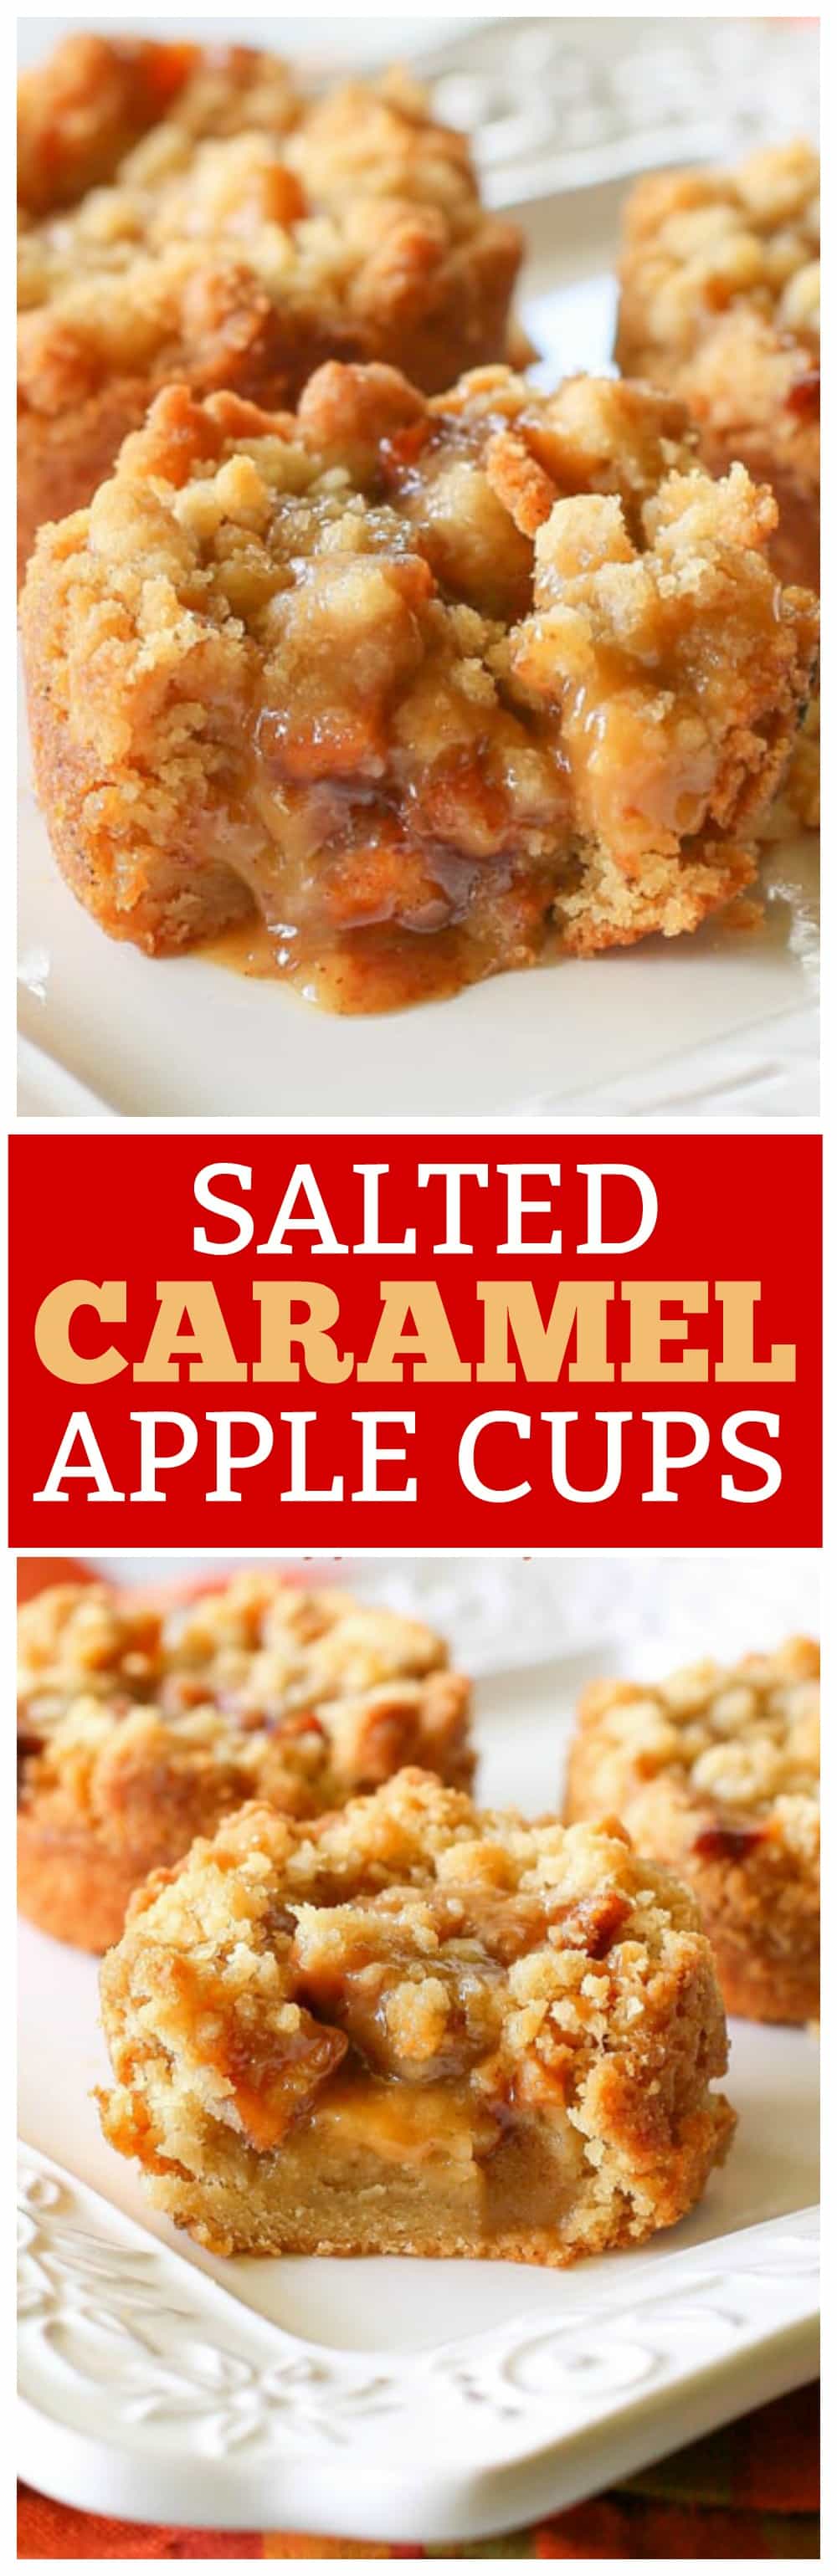 Salted Caramel Apple Cups - so good and the perfect fall dessert. #caramel #apple #cups #recipe #fall #dessert